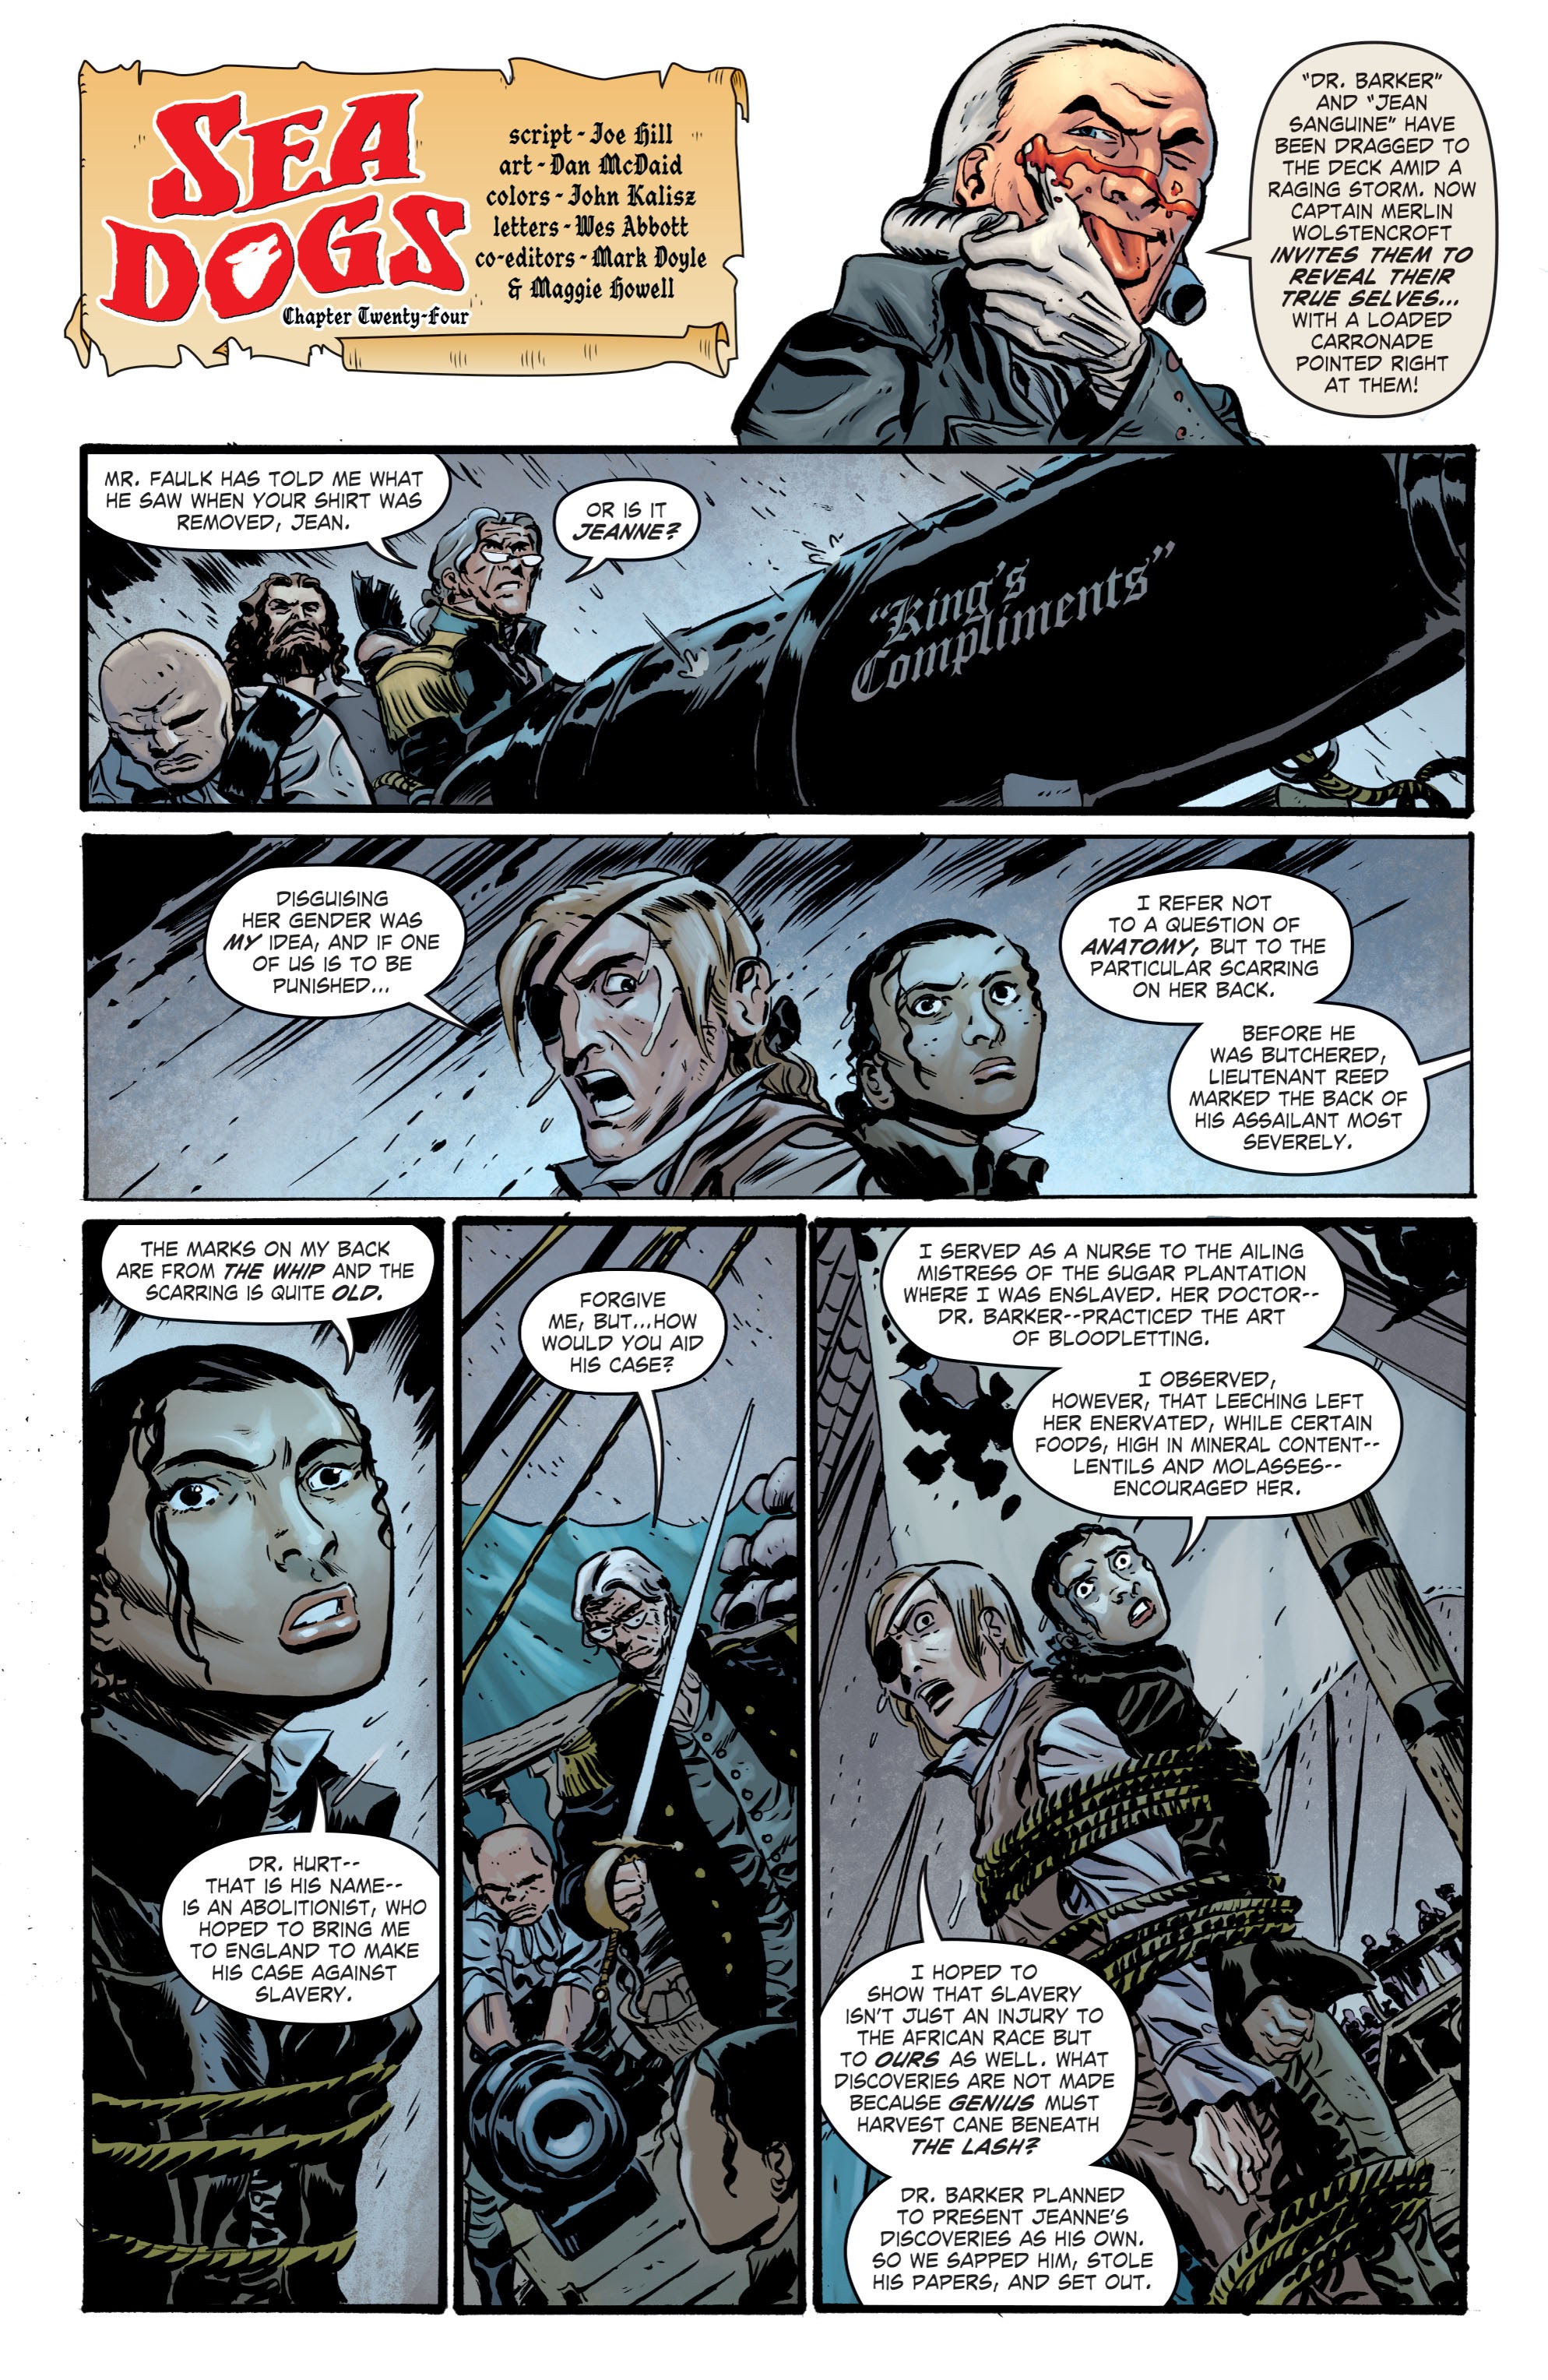 Read online Sea Dogs comic -  Issue # Full - 49